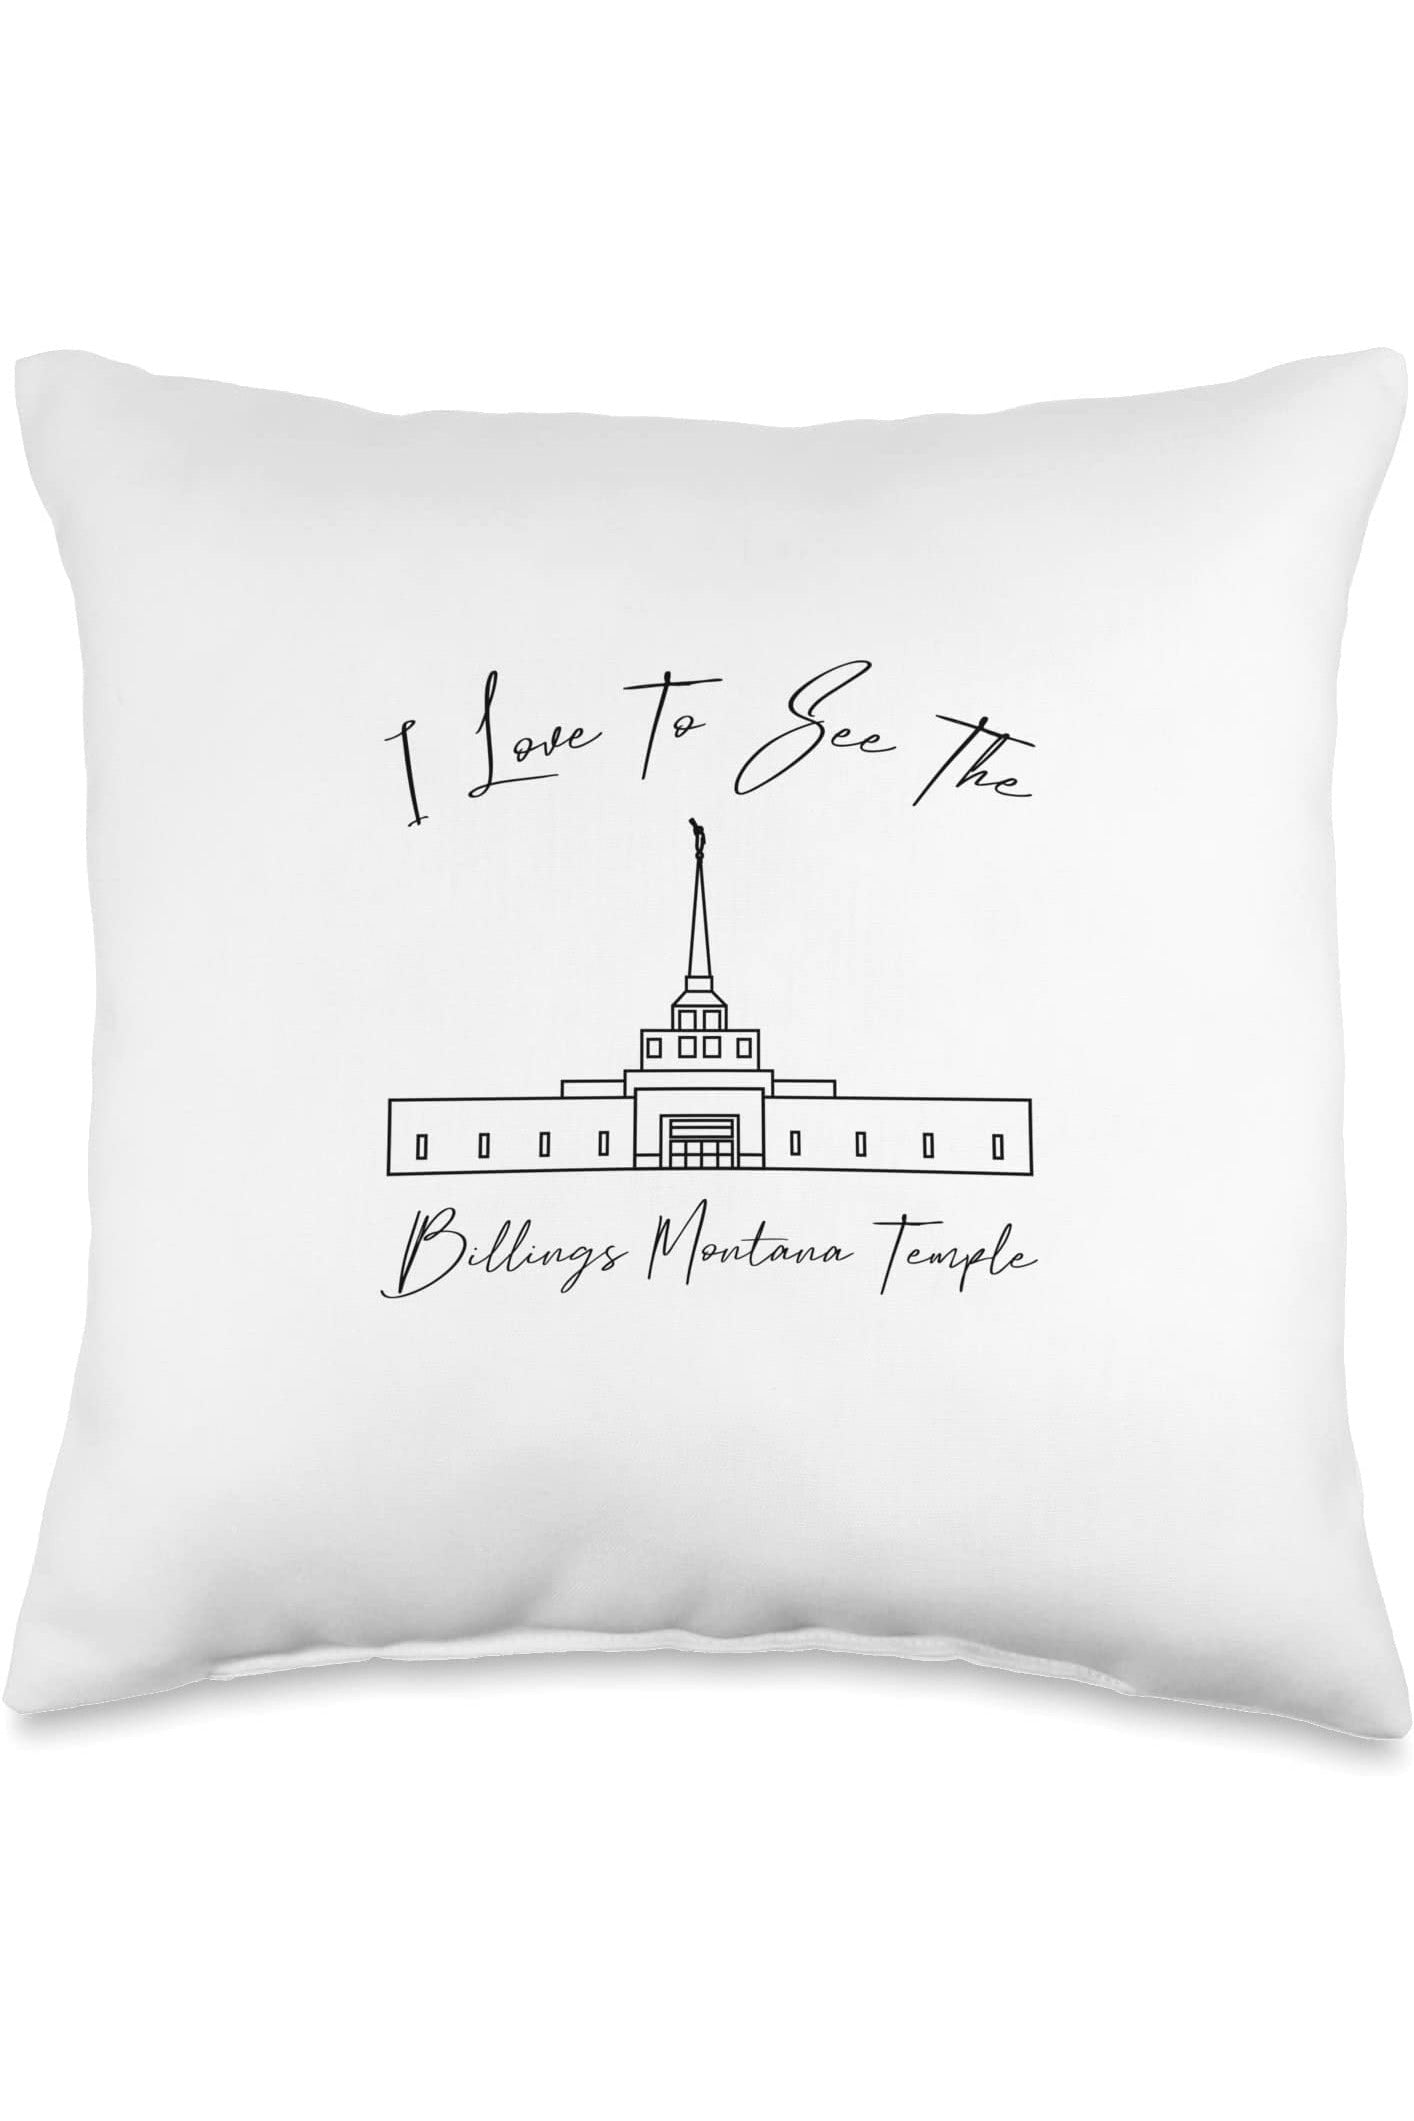 Billings Montana Temple Throw Pillows - Calligraphy Style (English) US